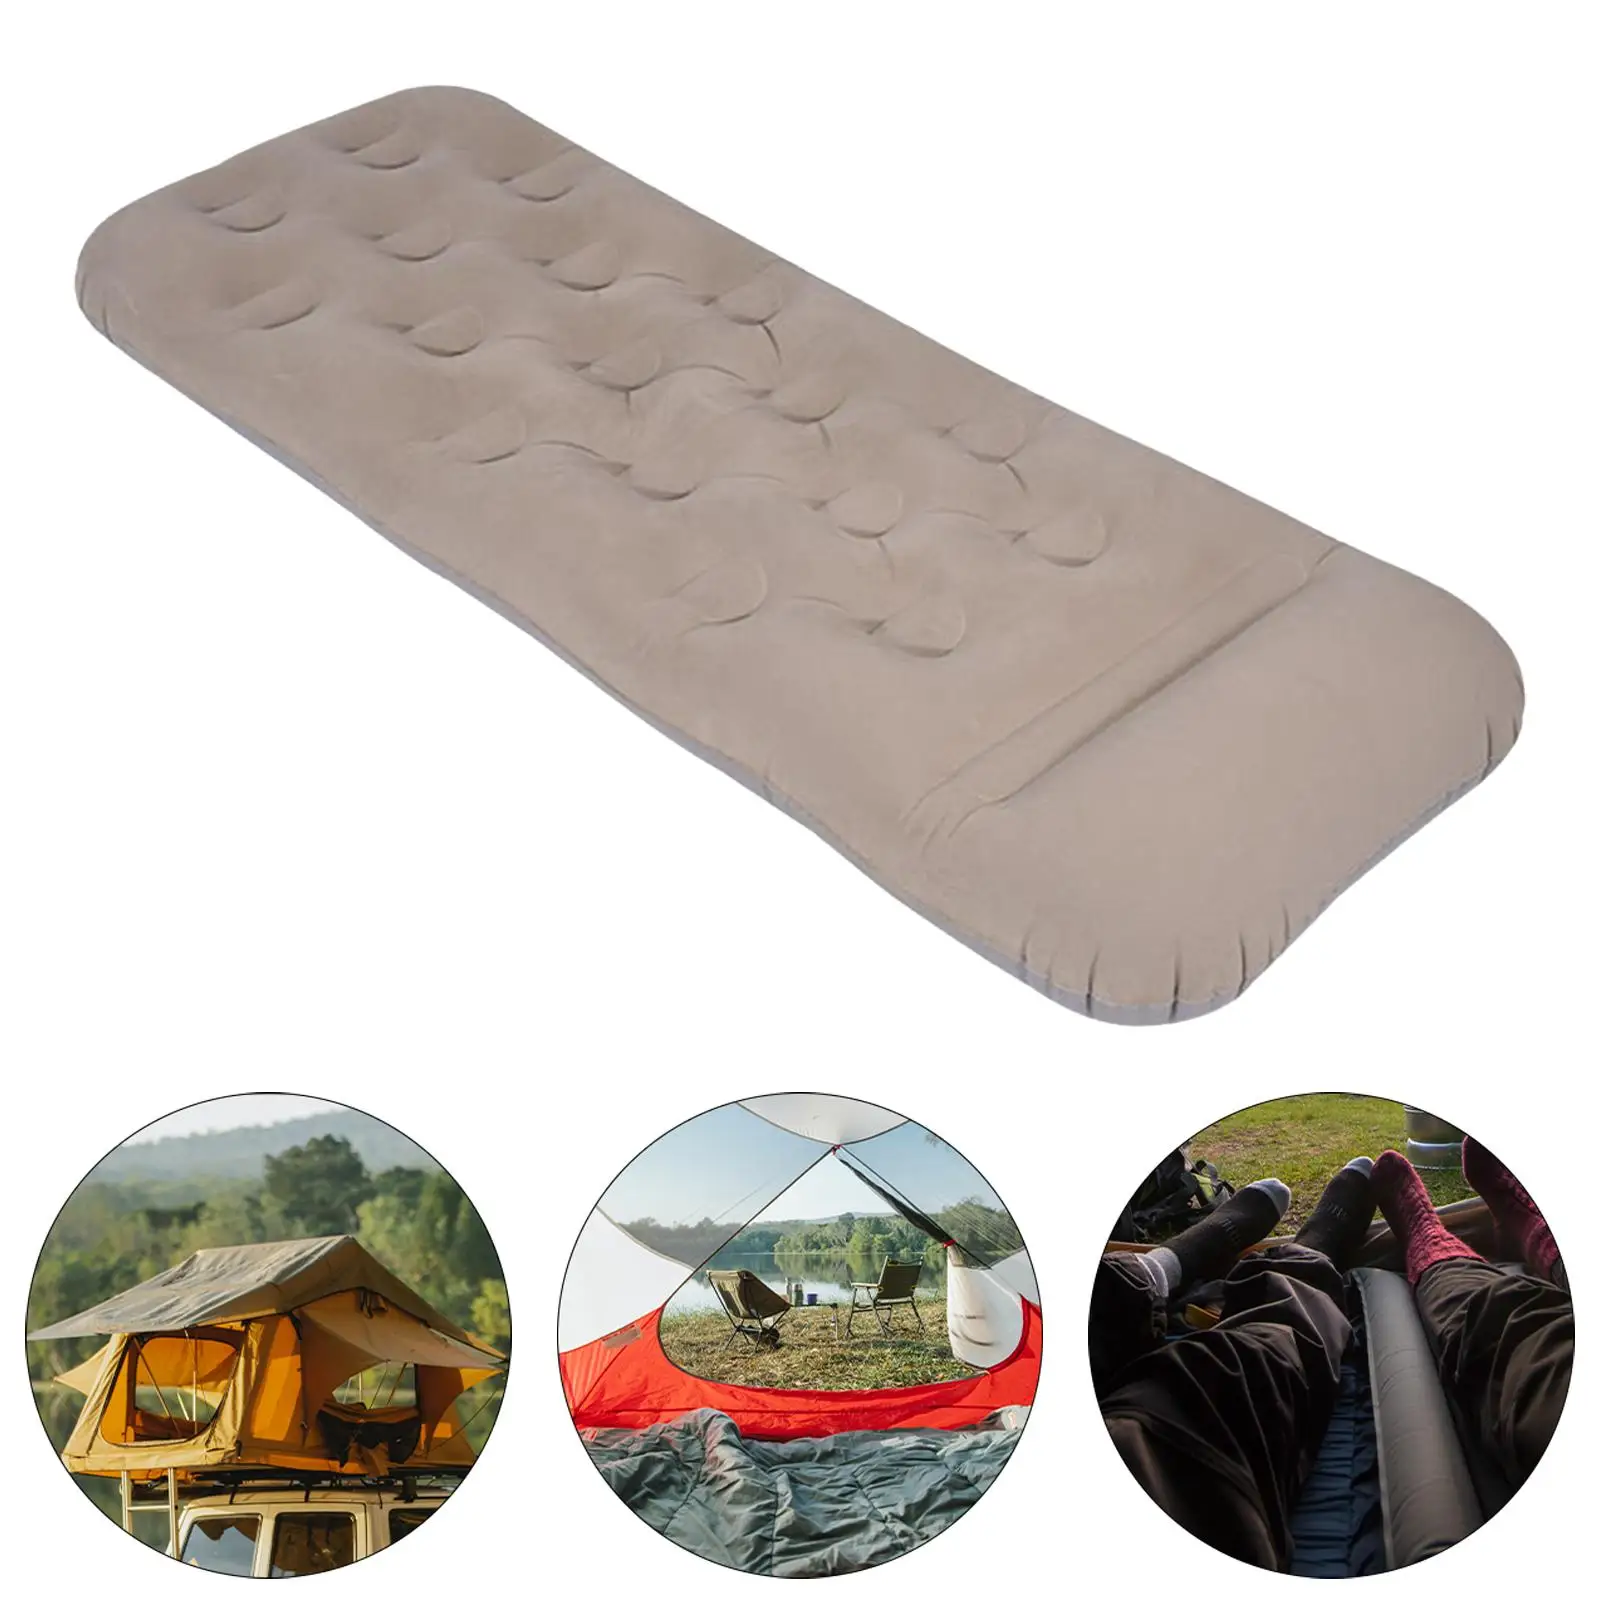 Camping Air Mattress Durable Portable Single Airbed Blow up Mattress Inflatable Bed for Indoor Outdoor Rooftop Home Travel Tent